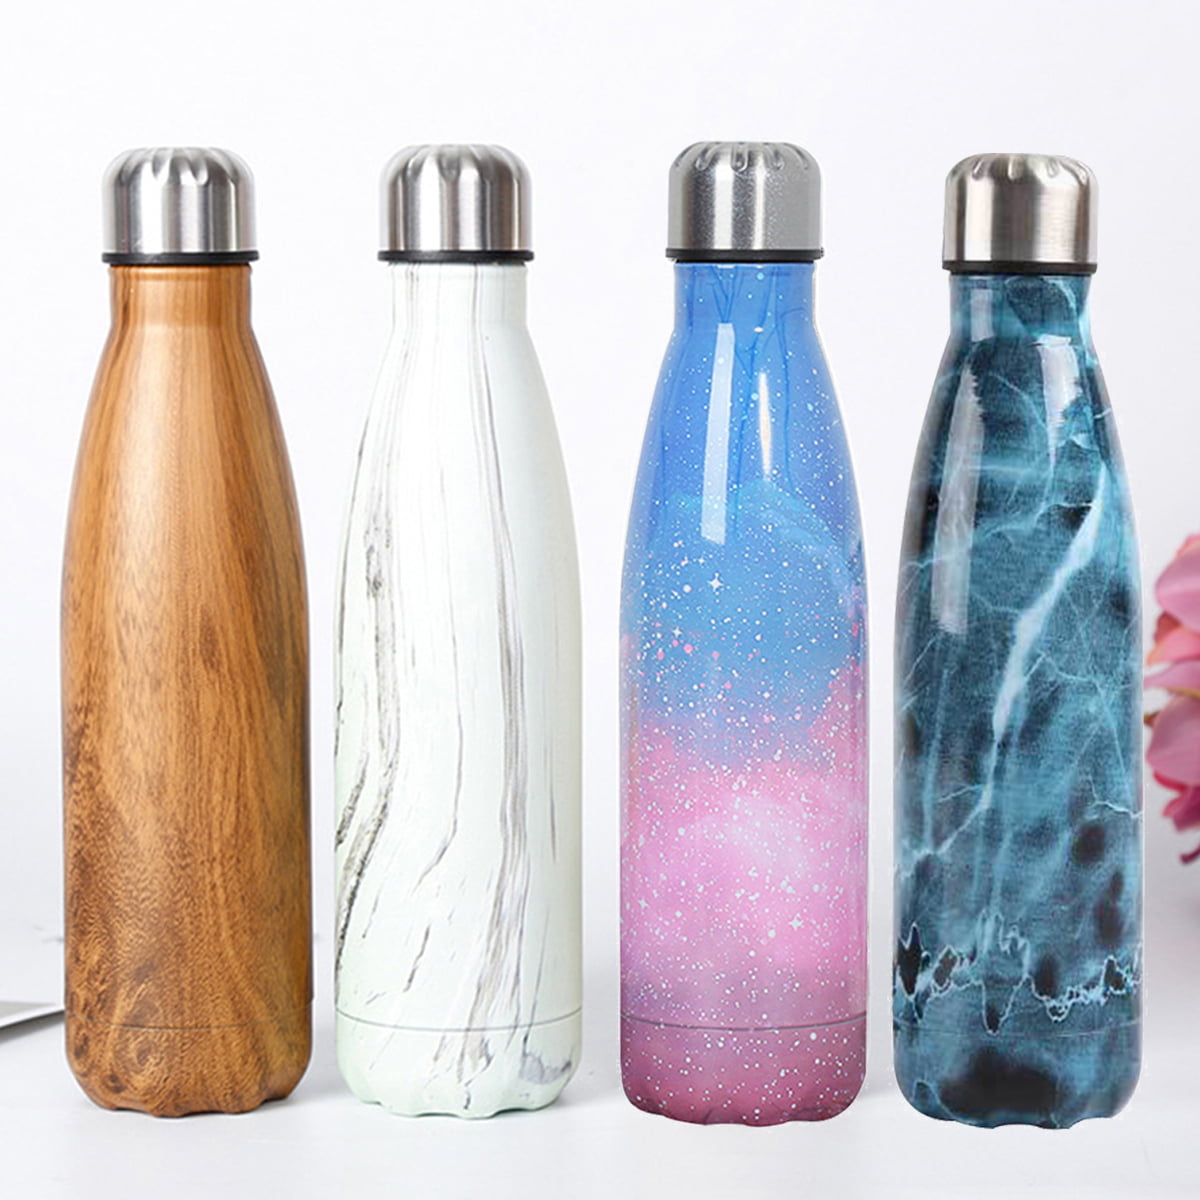 500ml VACUUM INSULATED BOTTLE Stainless Steel Water Hot Cold Tea Coffee Travel 